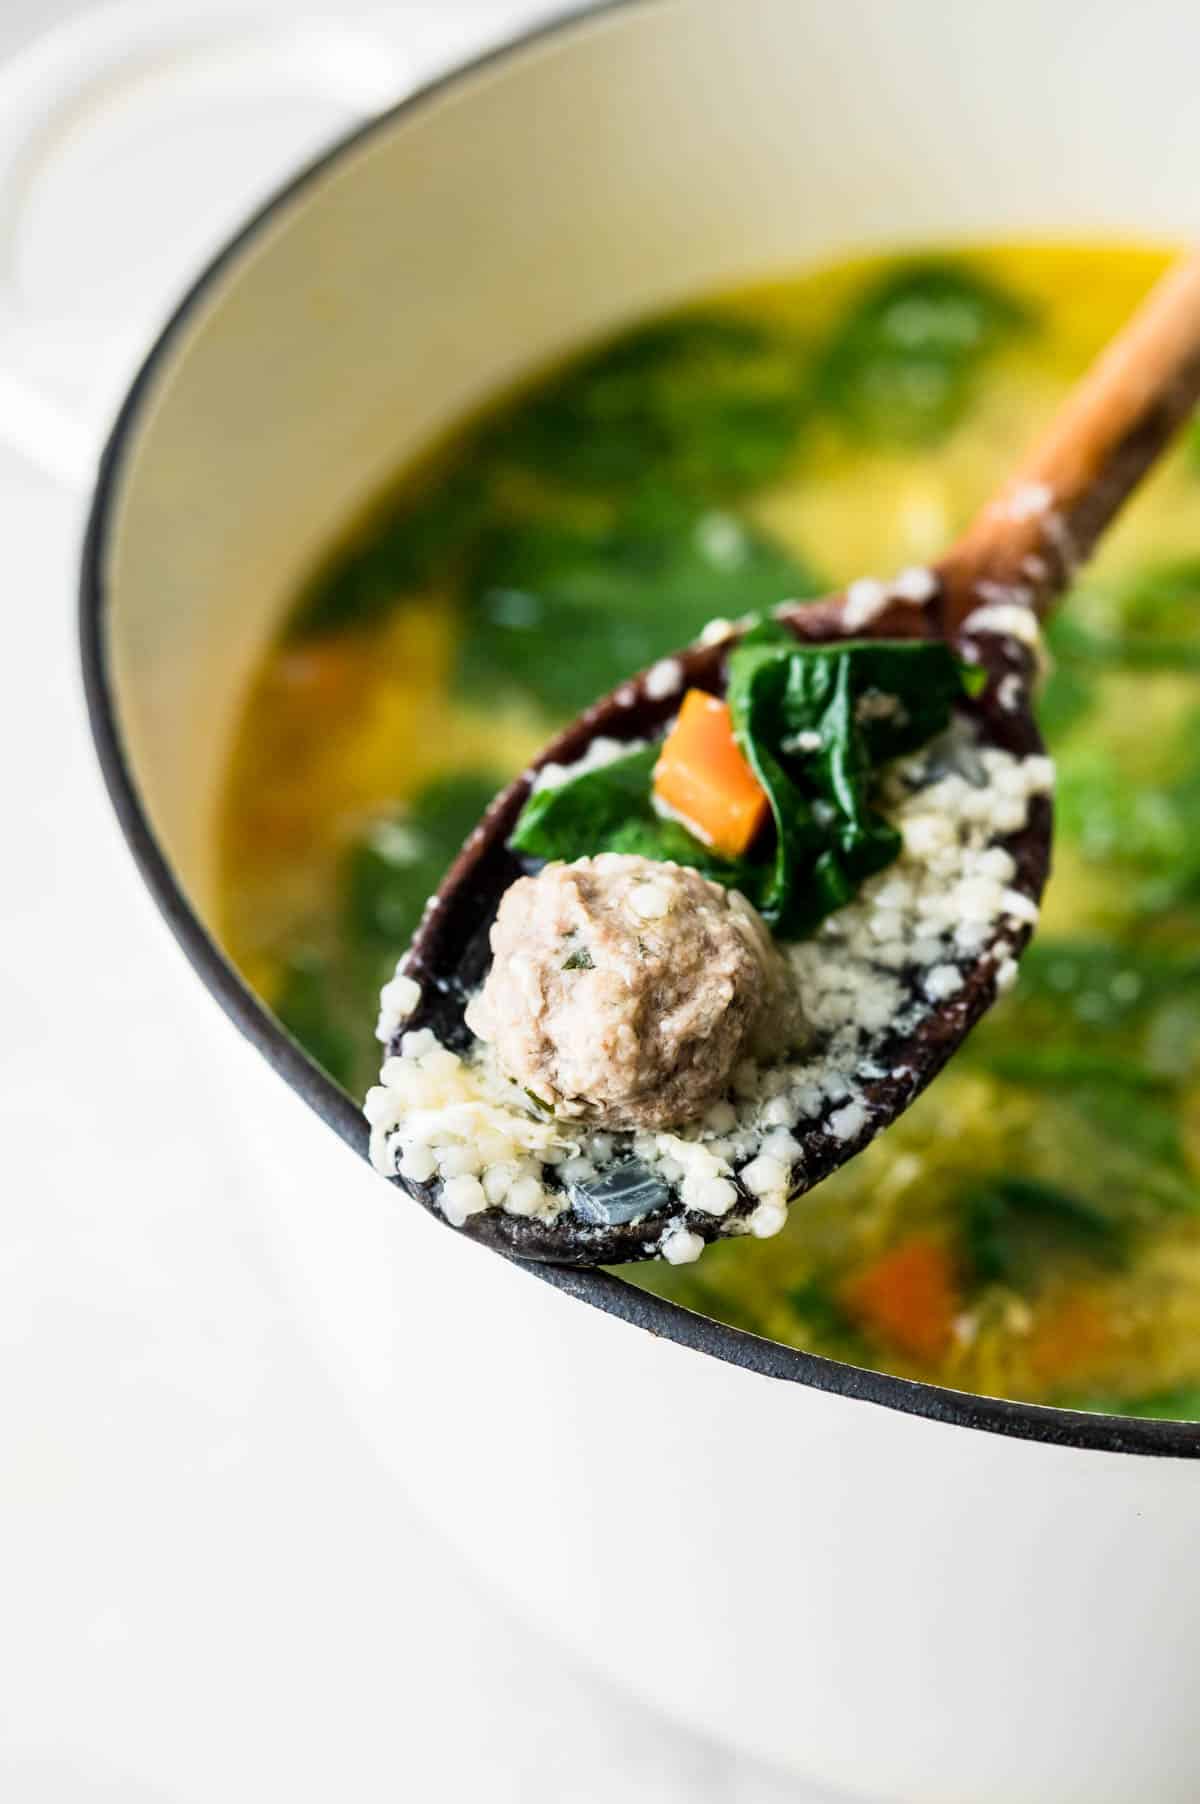 Spooning up a bit of Italian wedding soup recipe on a wooden spoon.